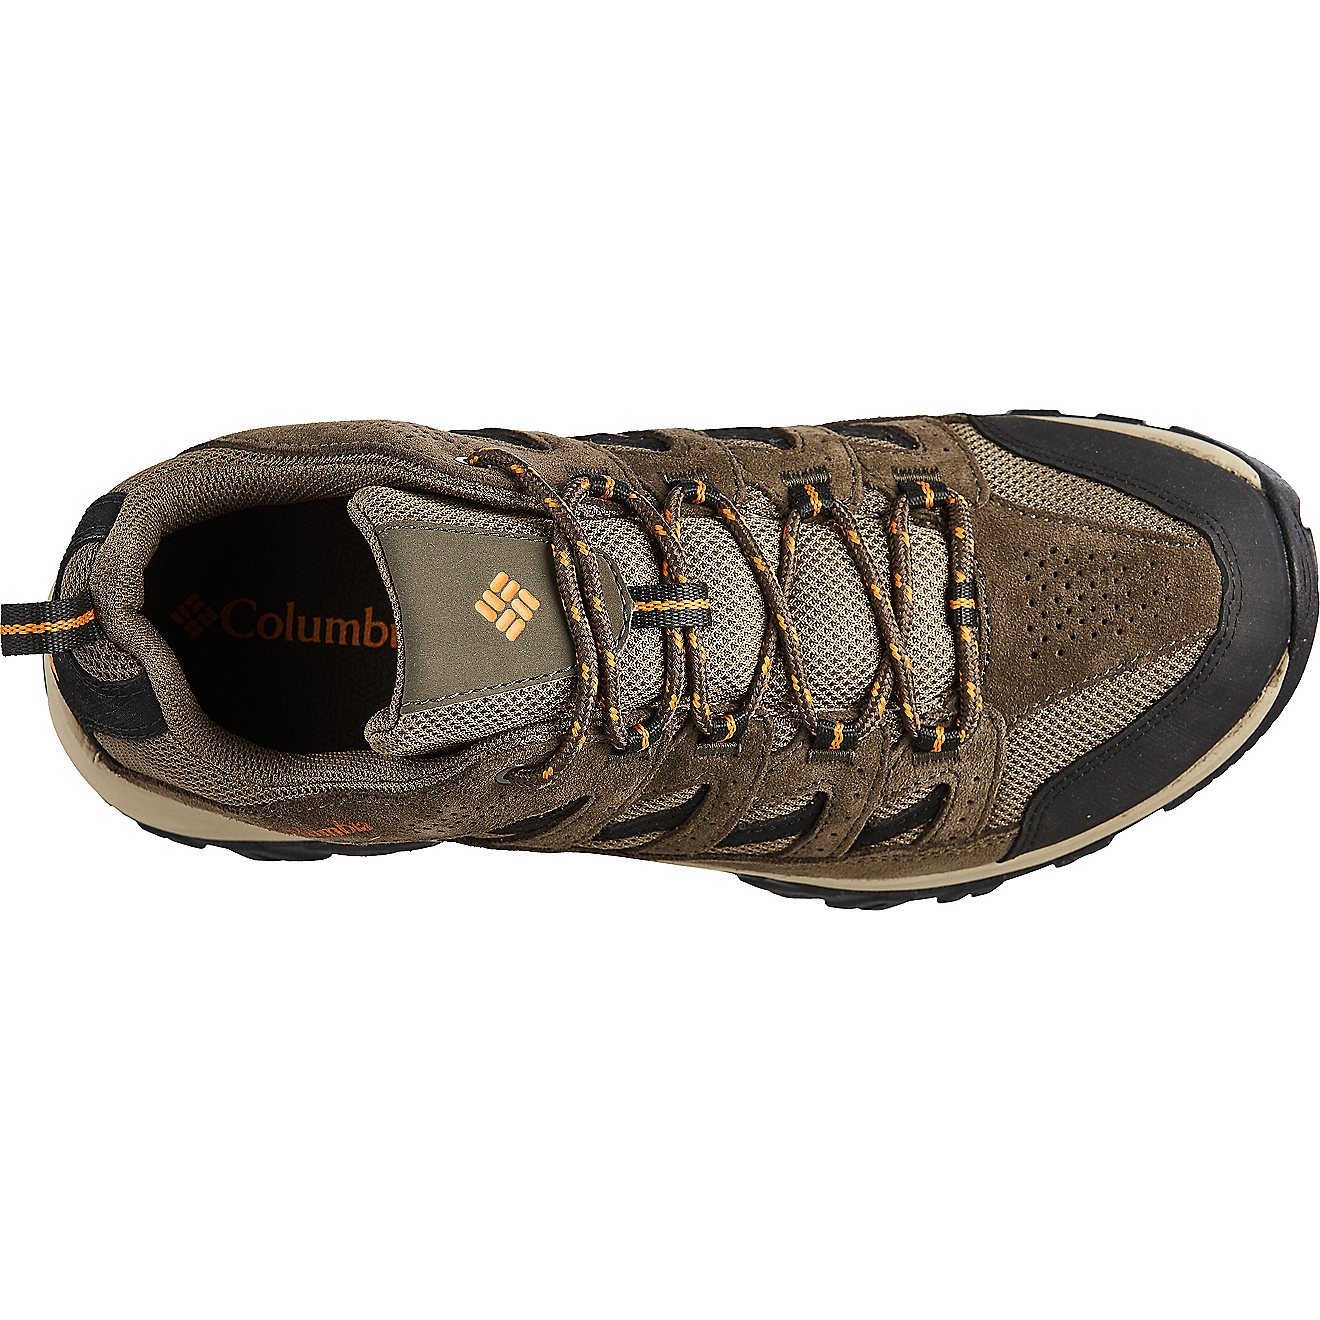 Columbia Sportswear Men's Crestwood Low Hiking Shoes                                                                             - view number 3